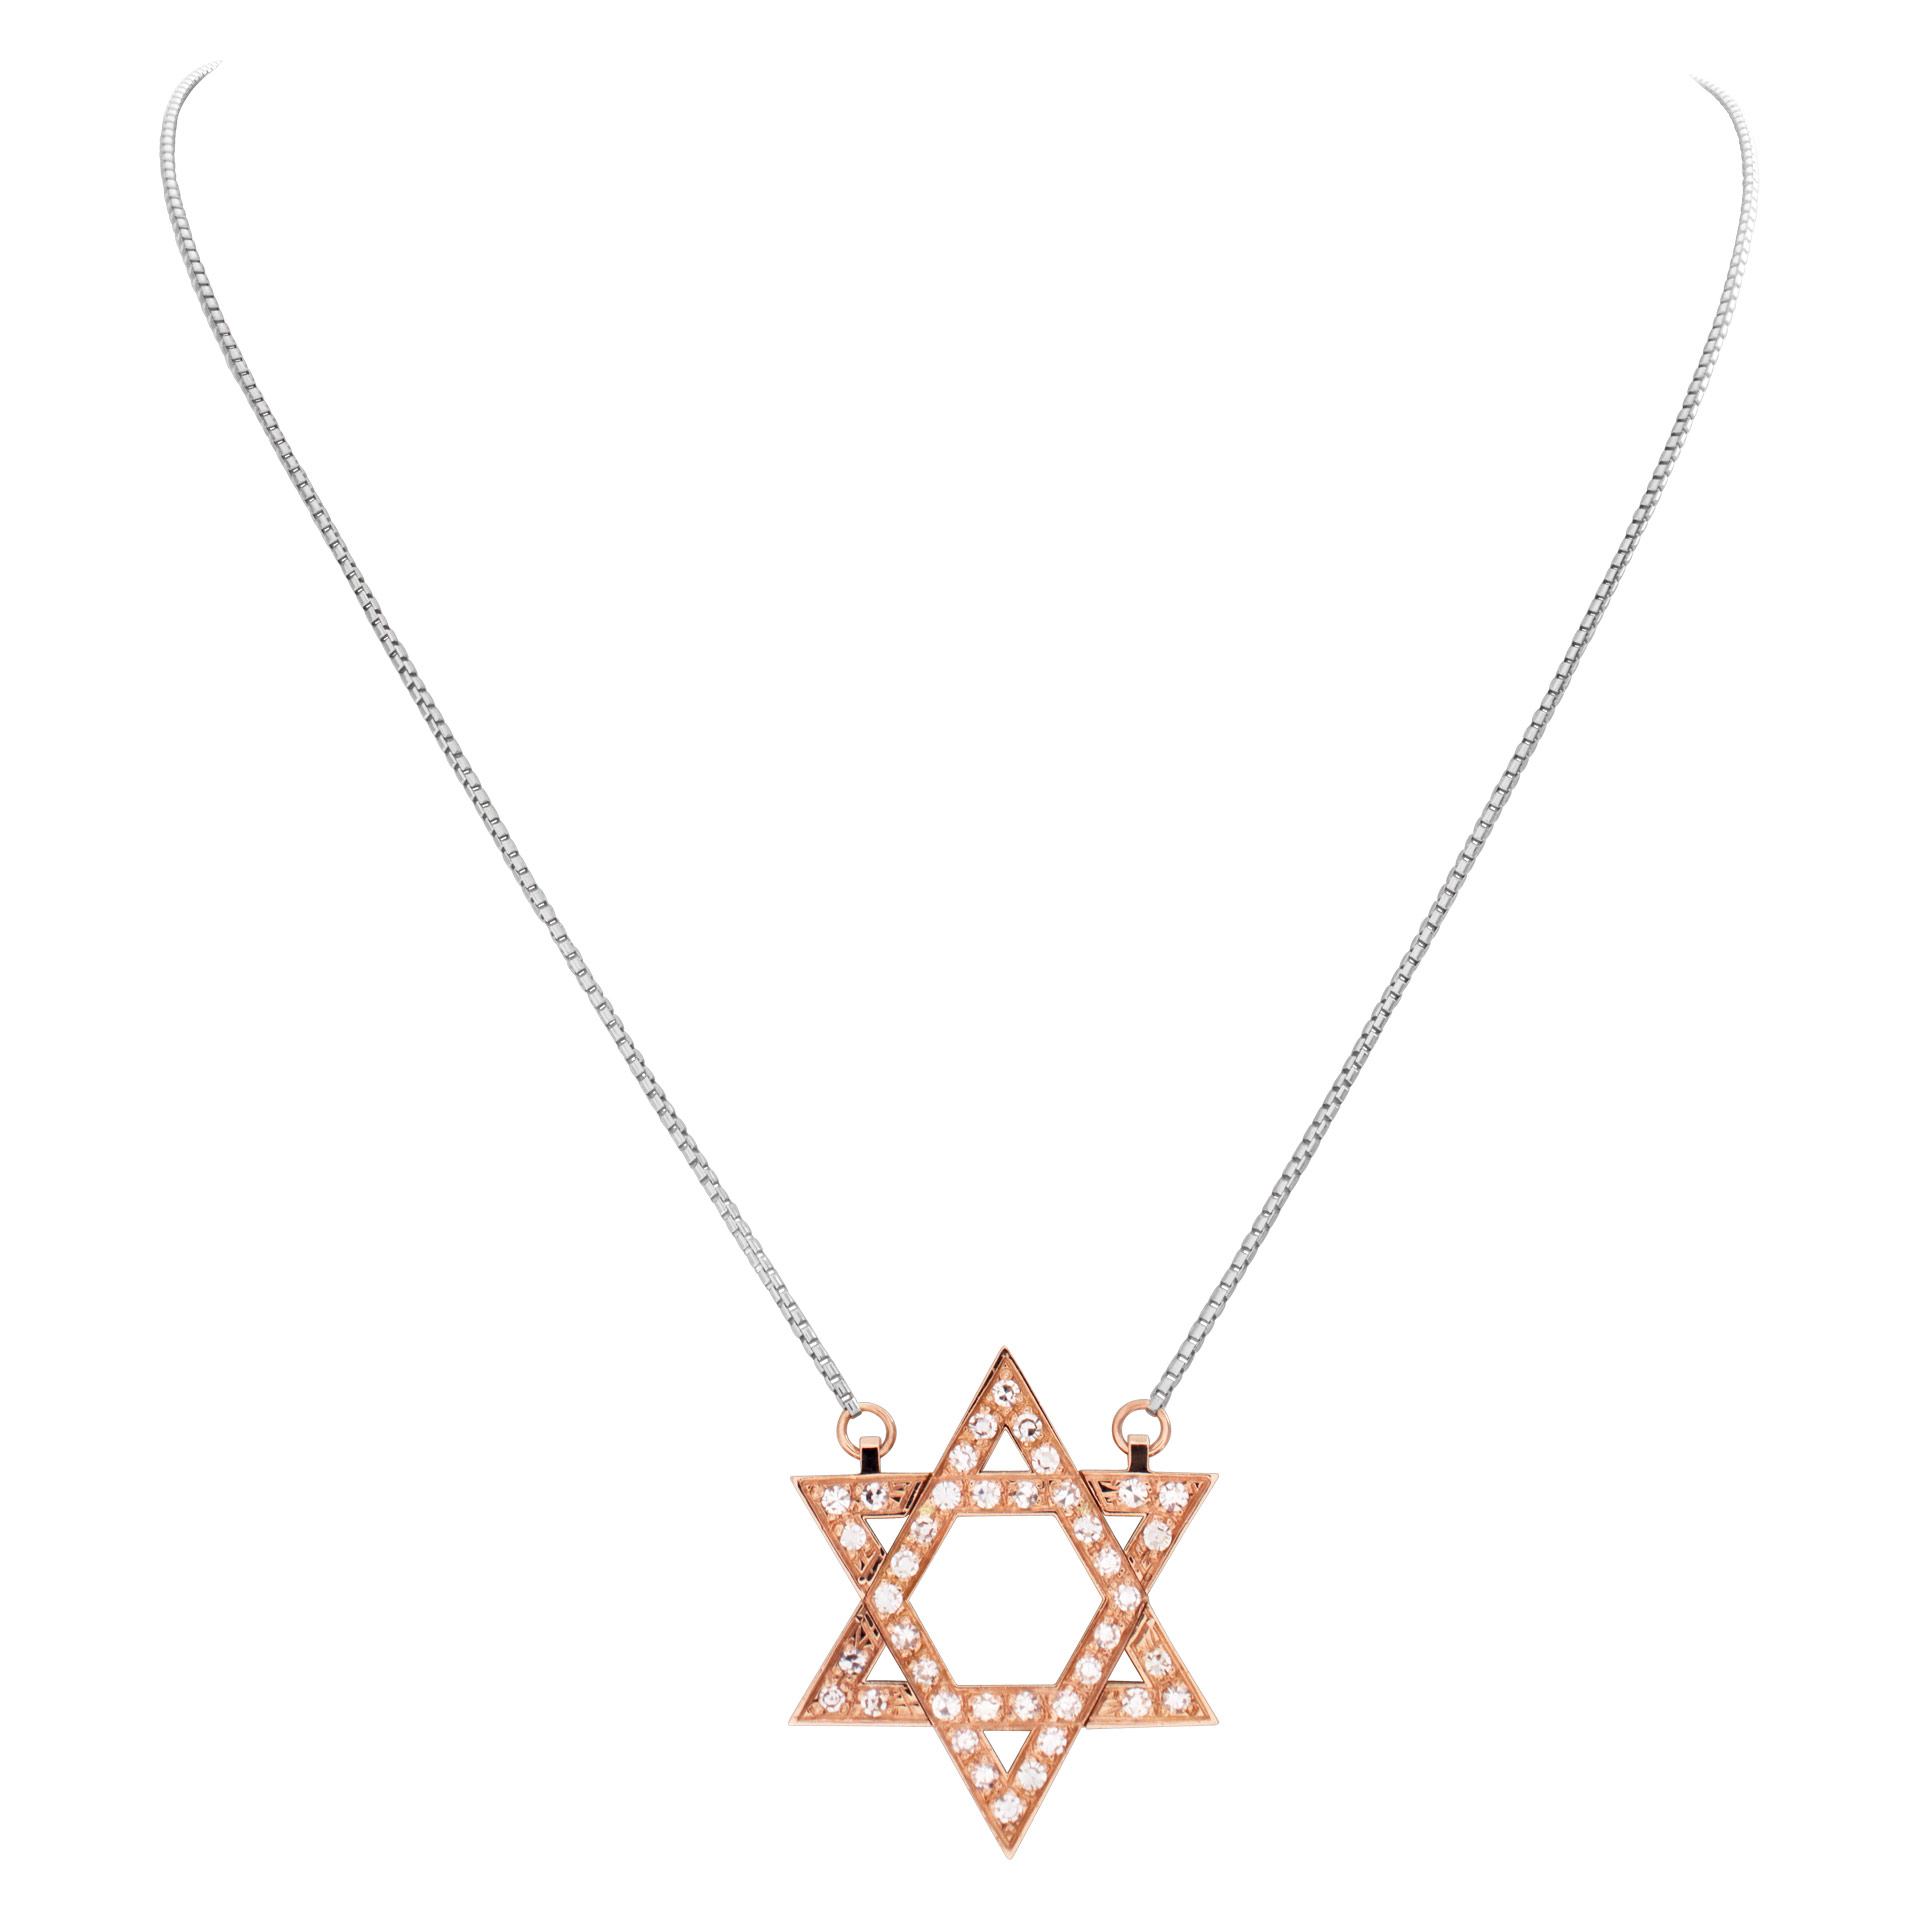 "Star of David" pendant with approximately 0.75 carat pave diamonds set in 18k rose gold with an 18k white gold chain